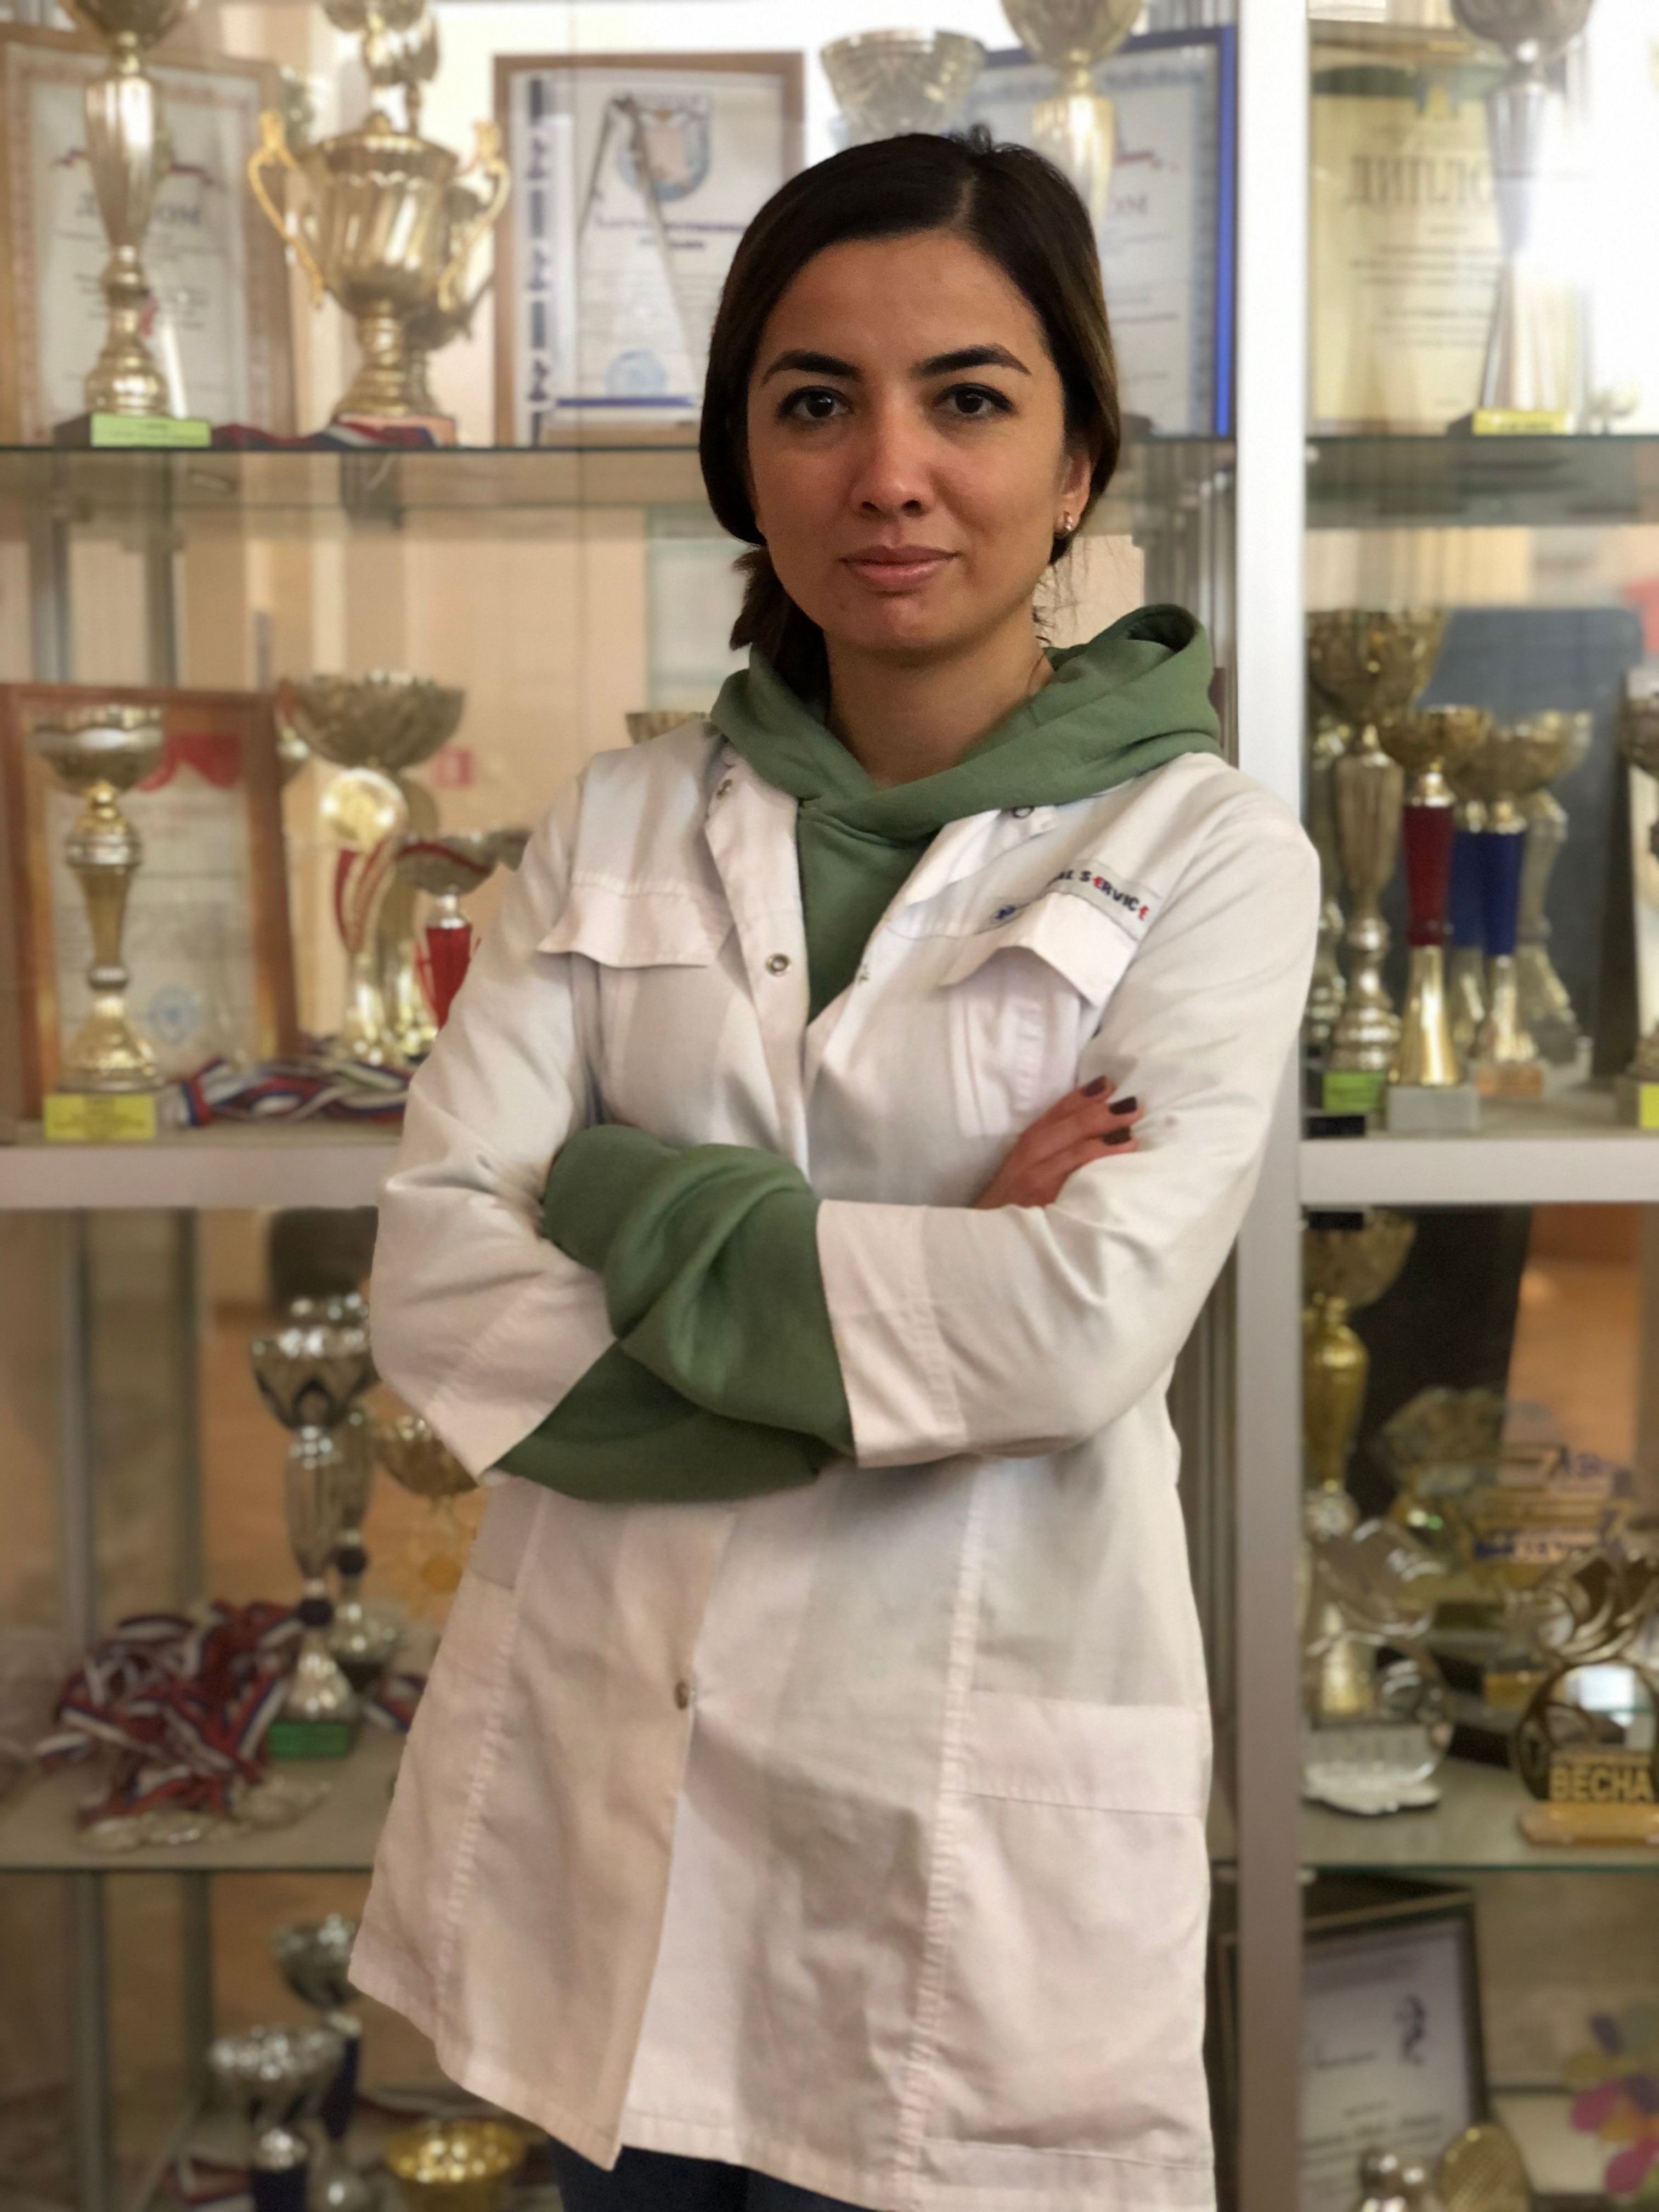 One of the scholarship holders this year is Gulshodakhon Sulaymonova, a fifth year student from Uzbekistan, studying General Medicine at Derzhavin Tambov State University. Gulshodakhon Sulaymonova turned to our scholarship department with a request for financial support due to the sudden death of her father and not being able to pay for her studies on the chosen program. Getting higher education has always been one of the main priorities of her family. From her story, we learned that after her father passed away, all the expenses fell on the shoulders of the single mother who decided to move to Russia, to her daughter, in order to be able to continue paying for her daughter's education. The General Director of RACUS organization Avbakar Nutsalov, together with the scholarship commission, decided to allocate a partial scholarship to pay the tuition fees for the 2022/2023 academic year for Gulshodakhon Sulaymonova. We hope that Gulshodakhon will soon successfully complete her studies in this prestigious and noble specialty and become an excellent doctor, the pride of her family.